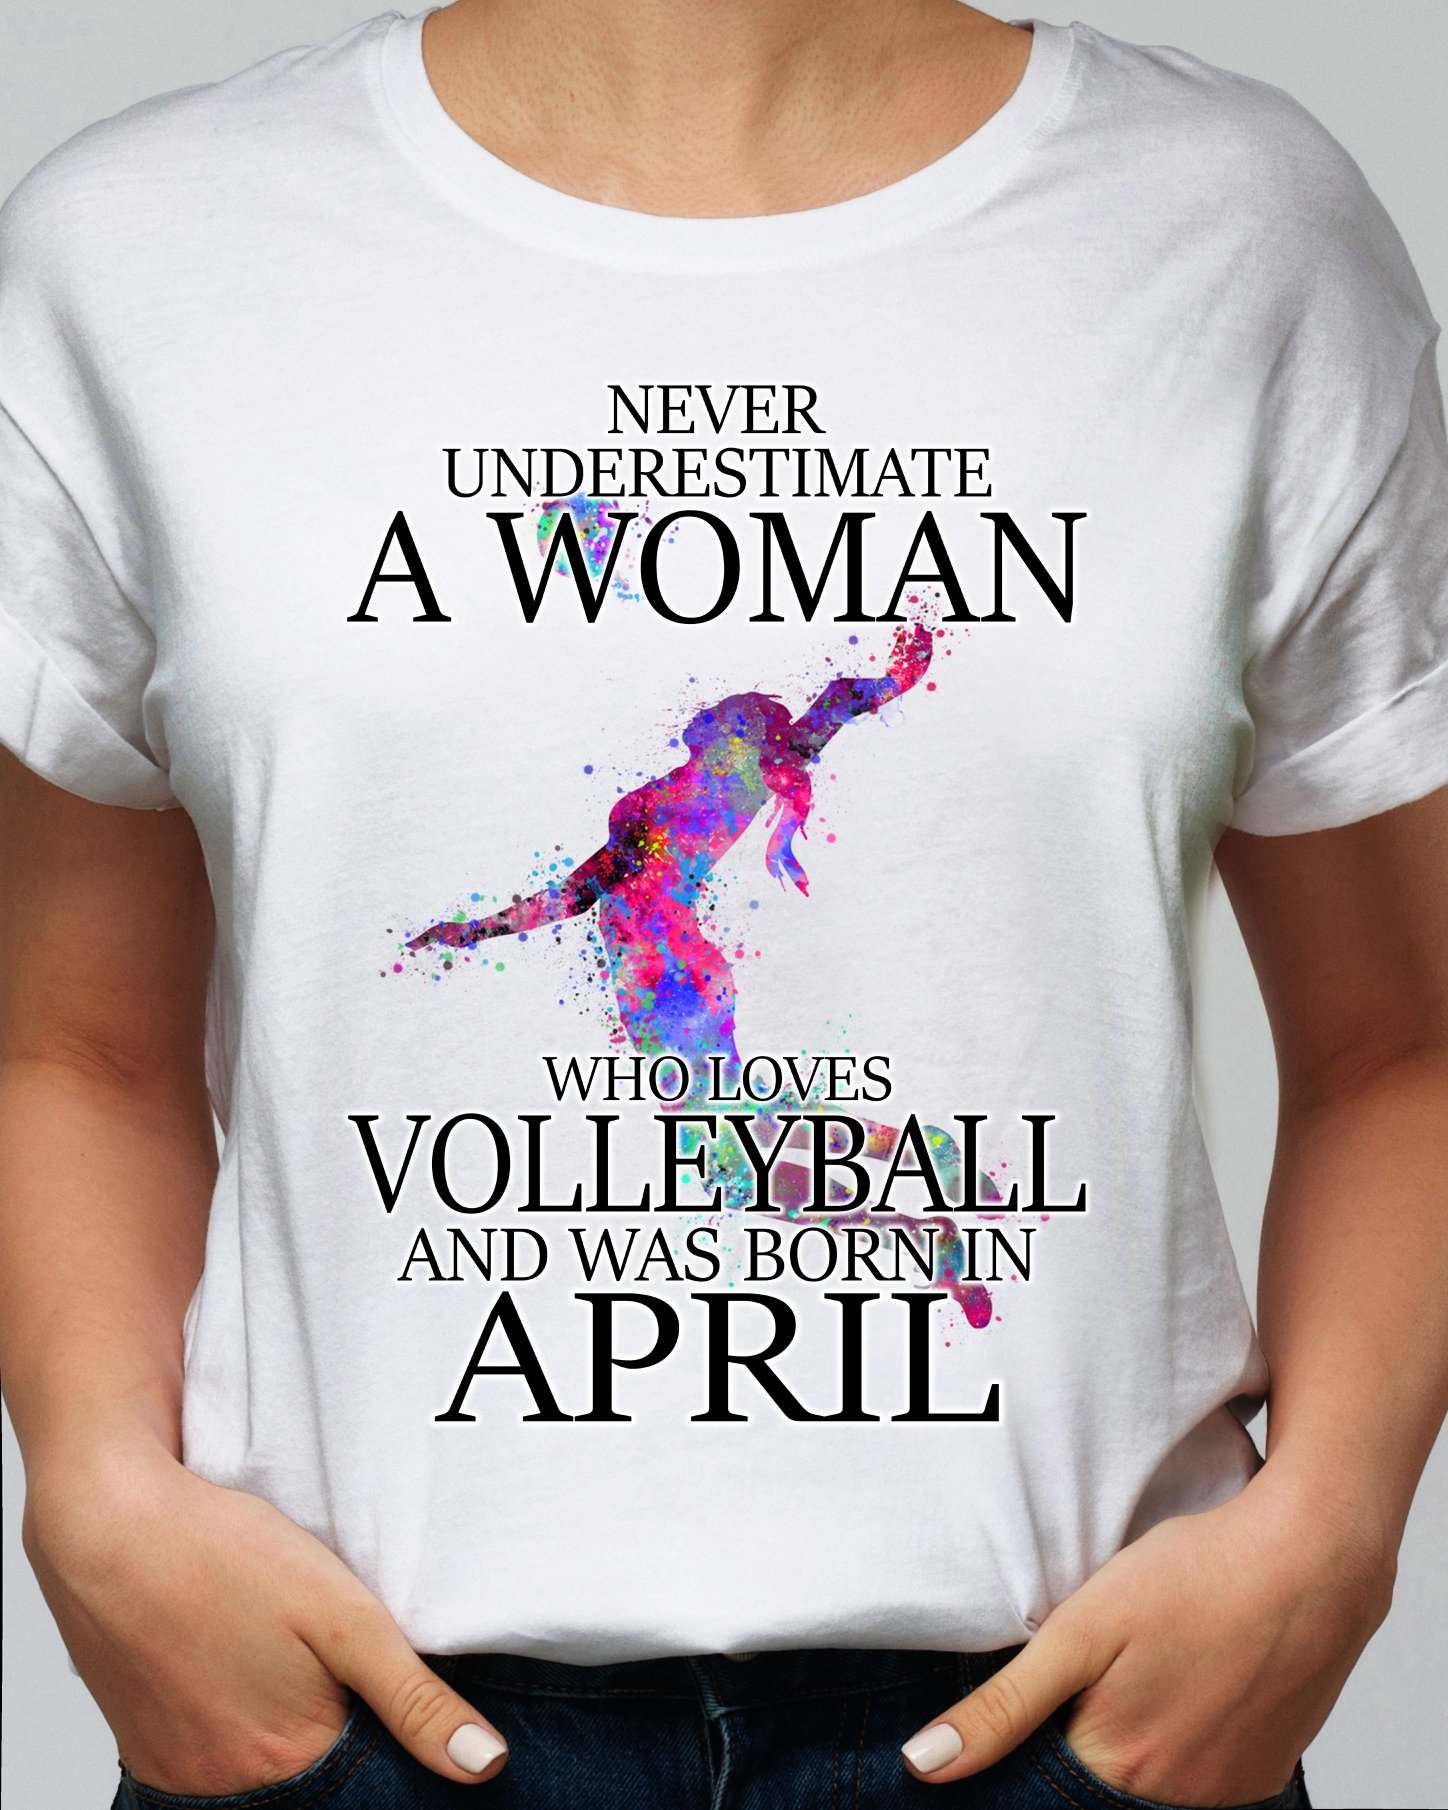 Never underestimate a woman who loves volleyball and was born in April